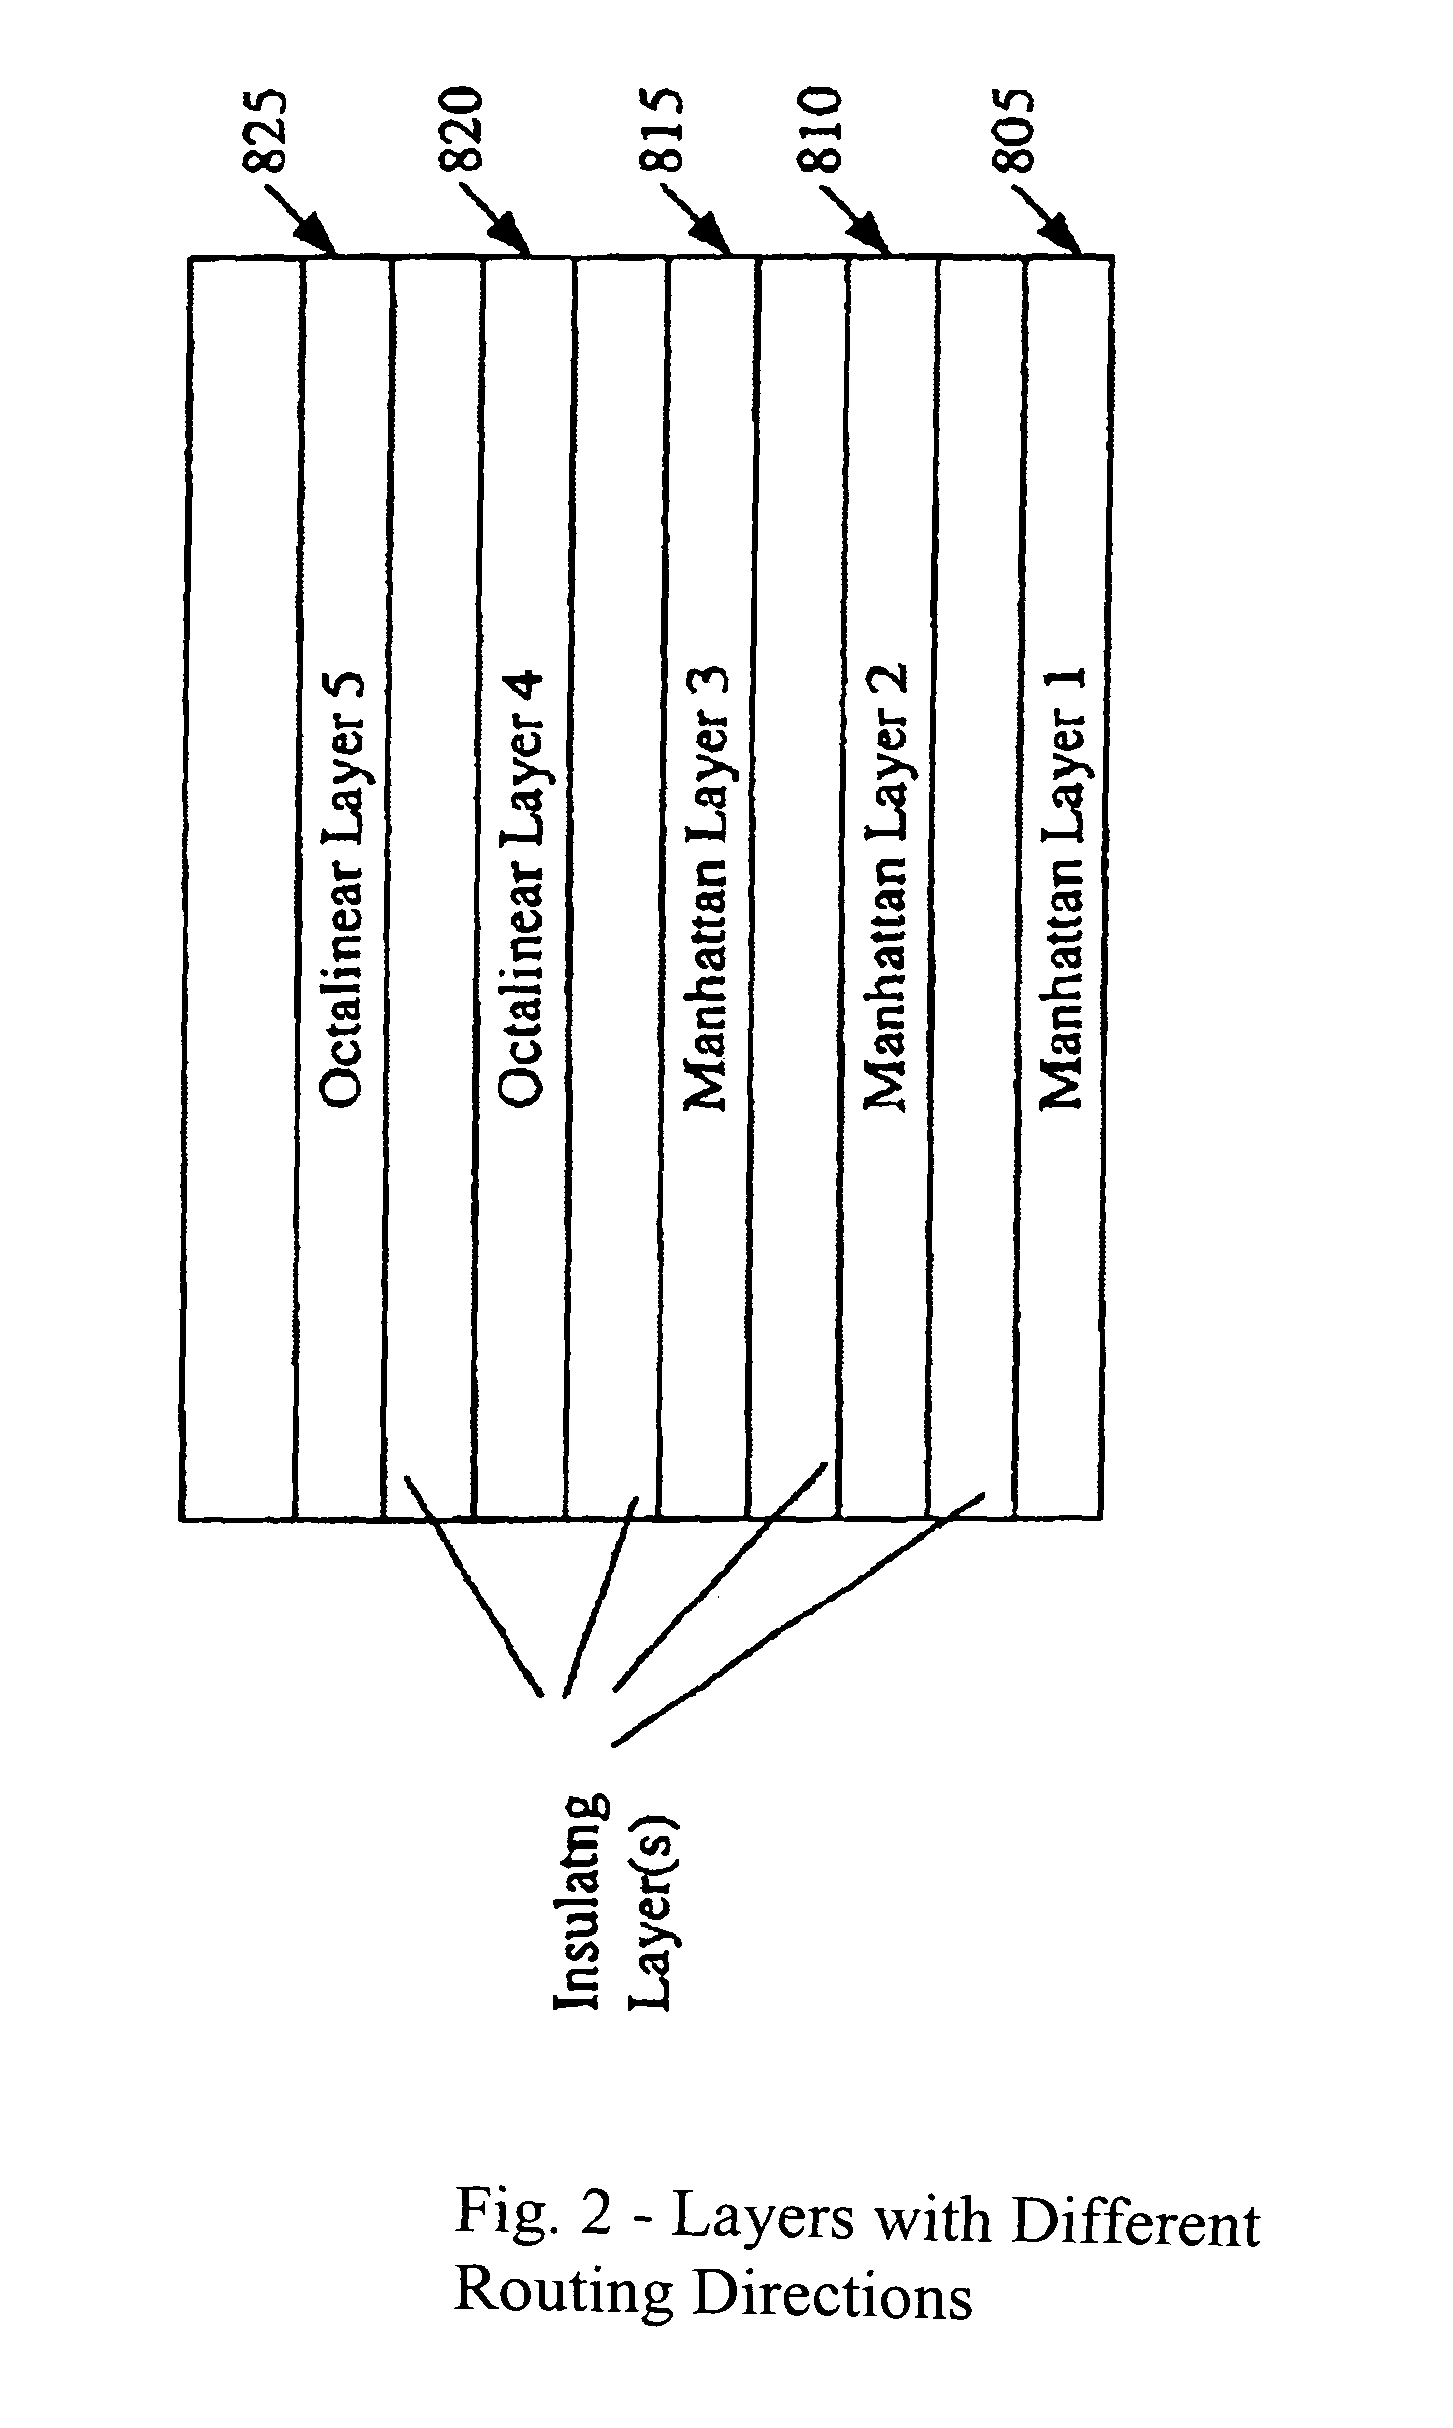 Method and system for implementing an analytical wirelength formulation